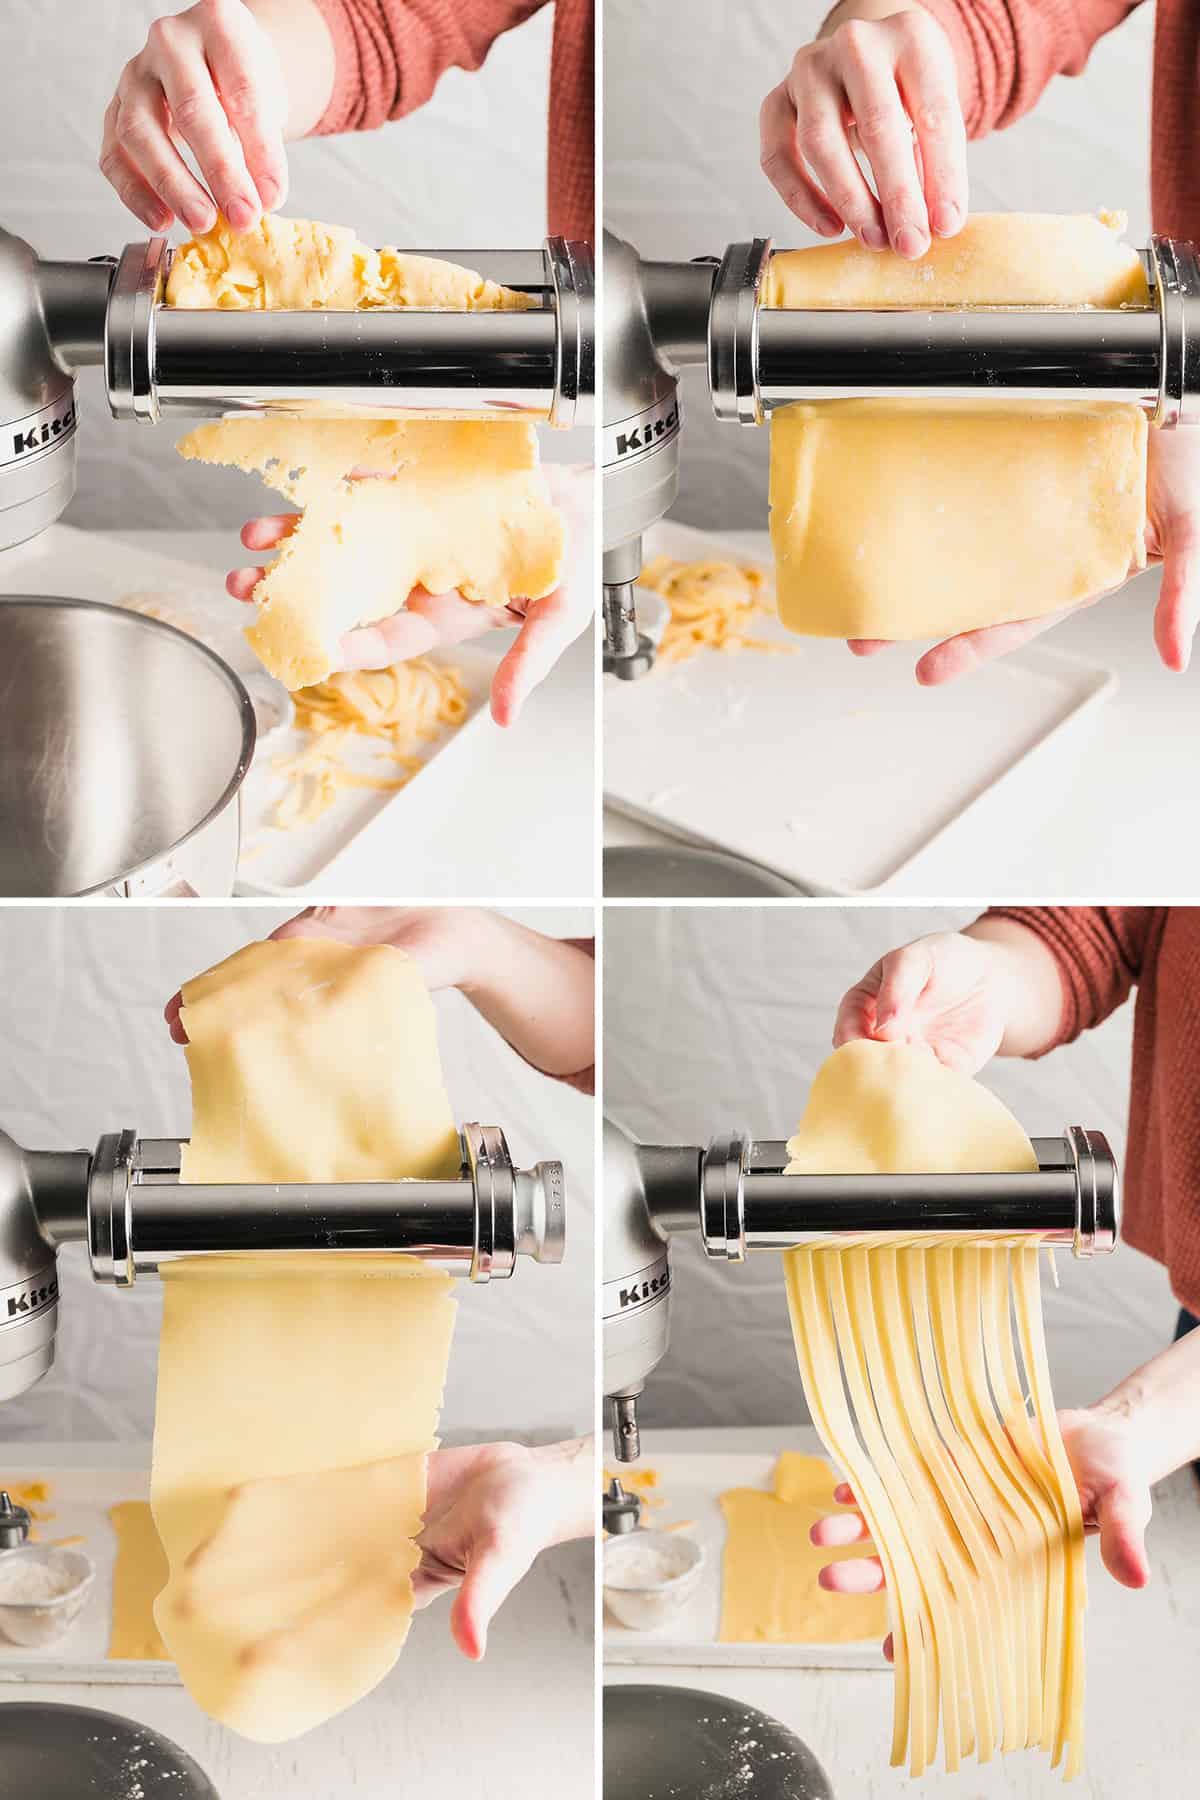 Passing pasta dough through a pasta machine to make sheets, then passing through the roller to cut fettuccini.